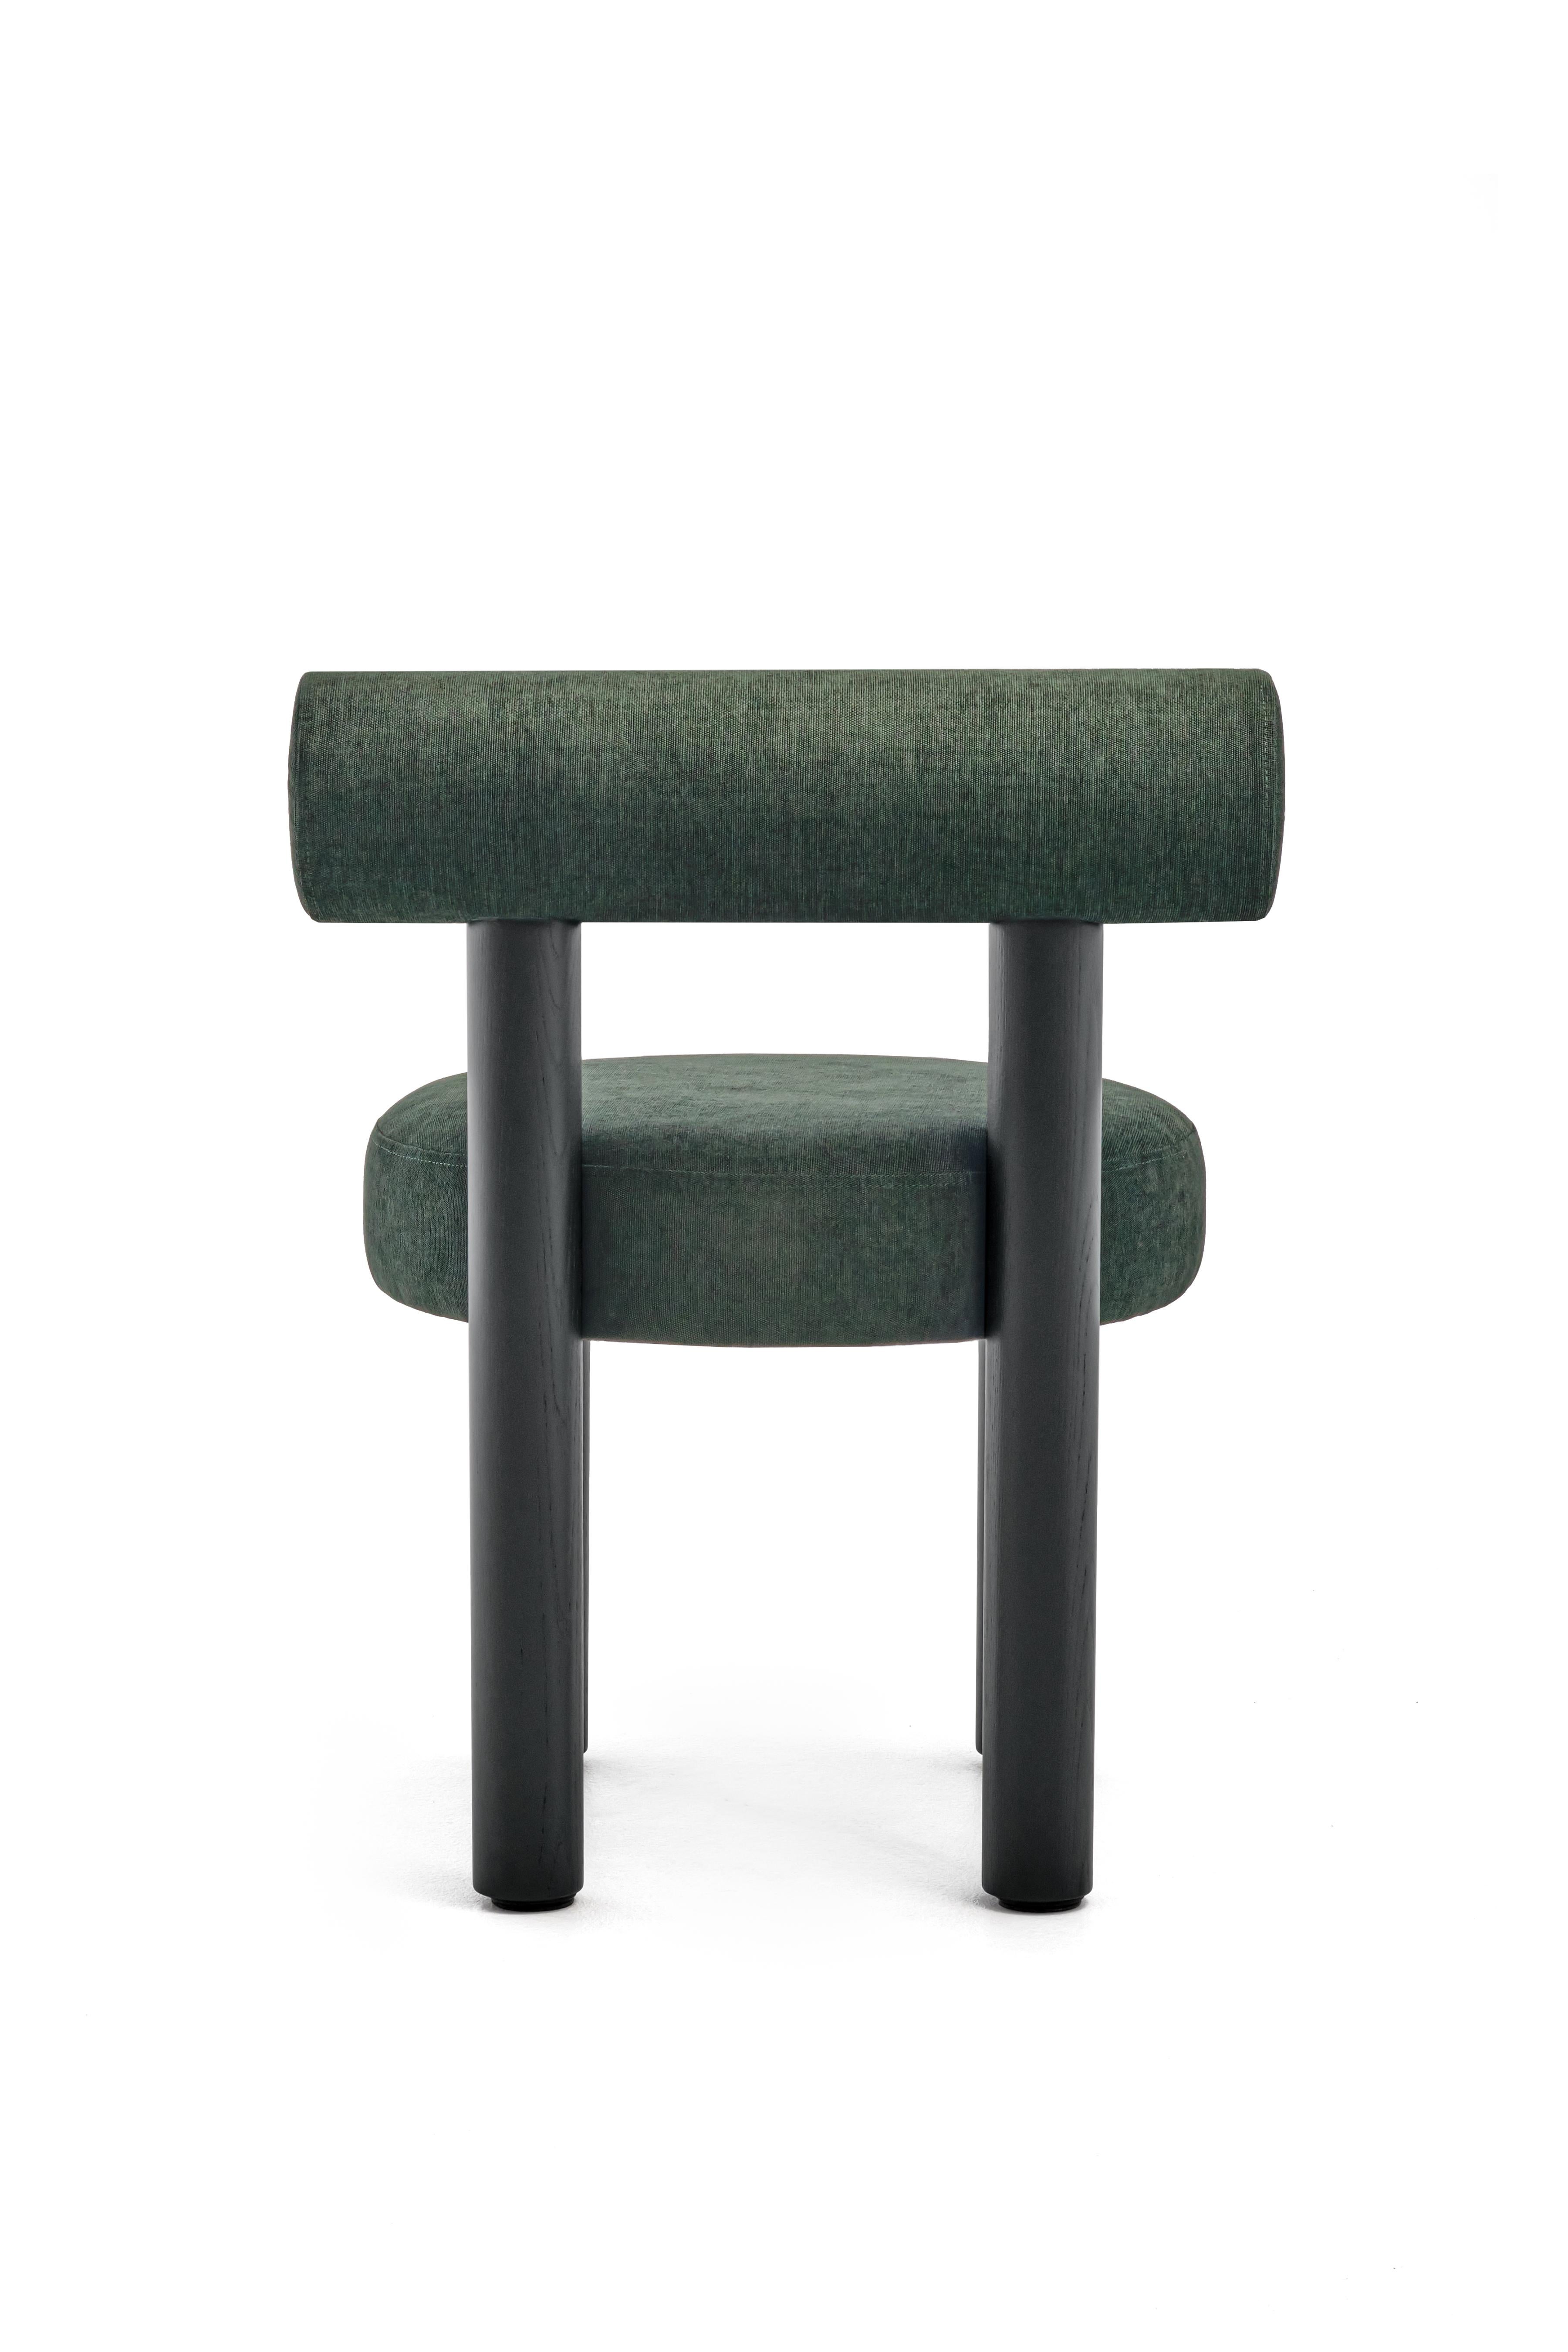 Contemporary Wooden Chair 'Gropius Cs2' by Noom, Green Ranger 68 For Sale 2